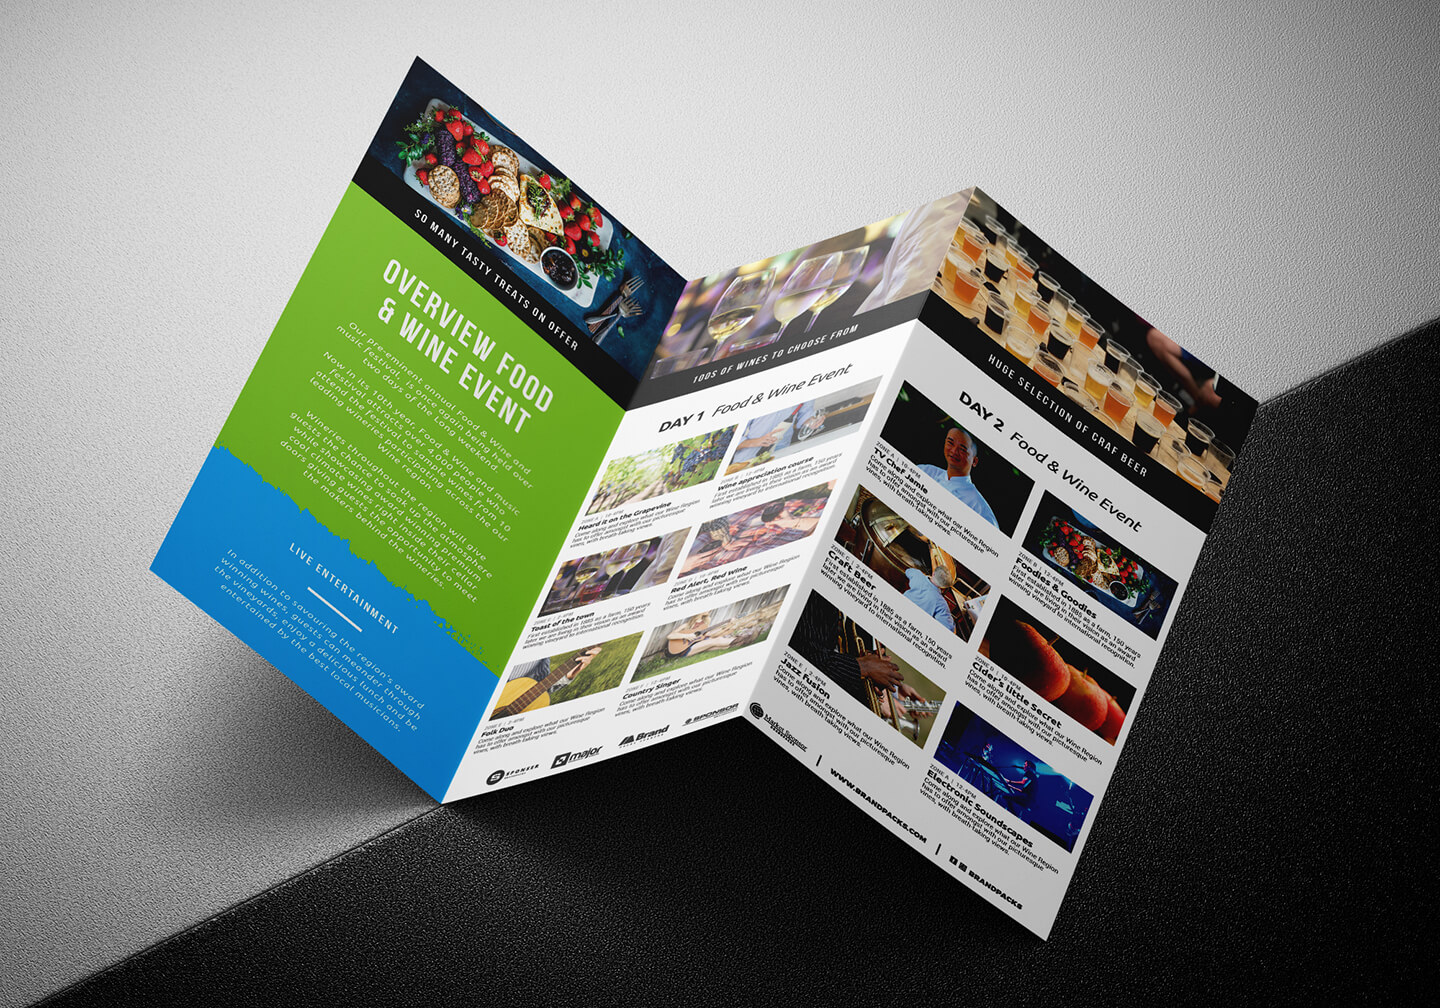 Free Tri Fold Brochure Template For Events & Festivals – Psd Inside Brochure 3 Fold Template Psd